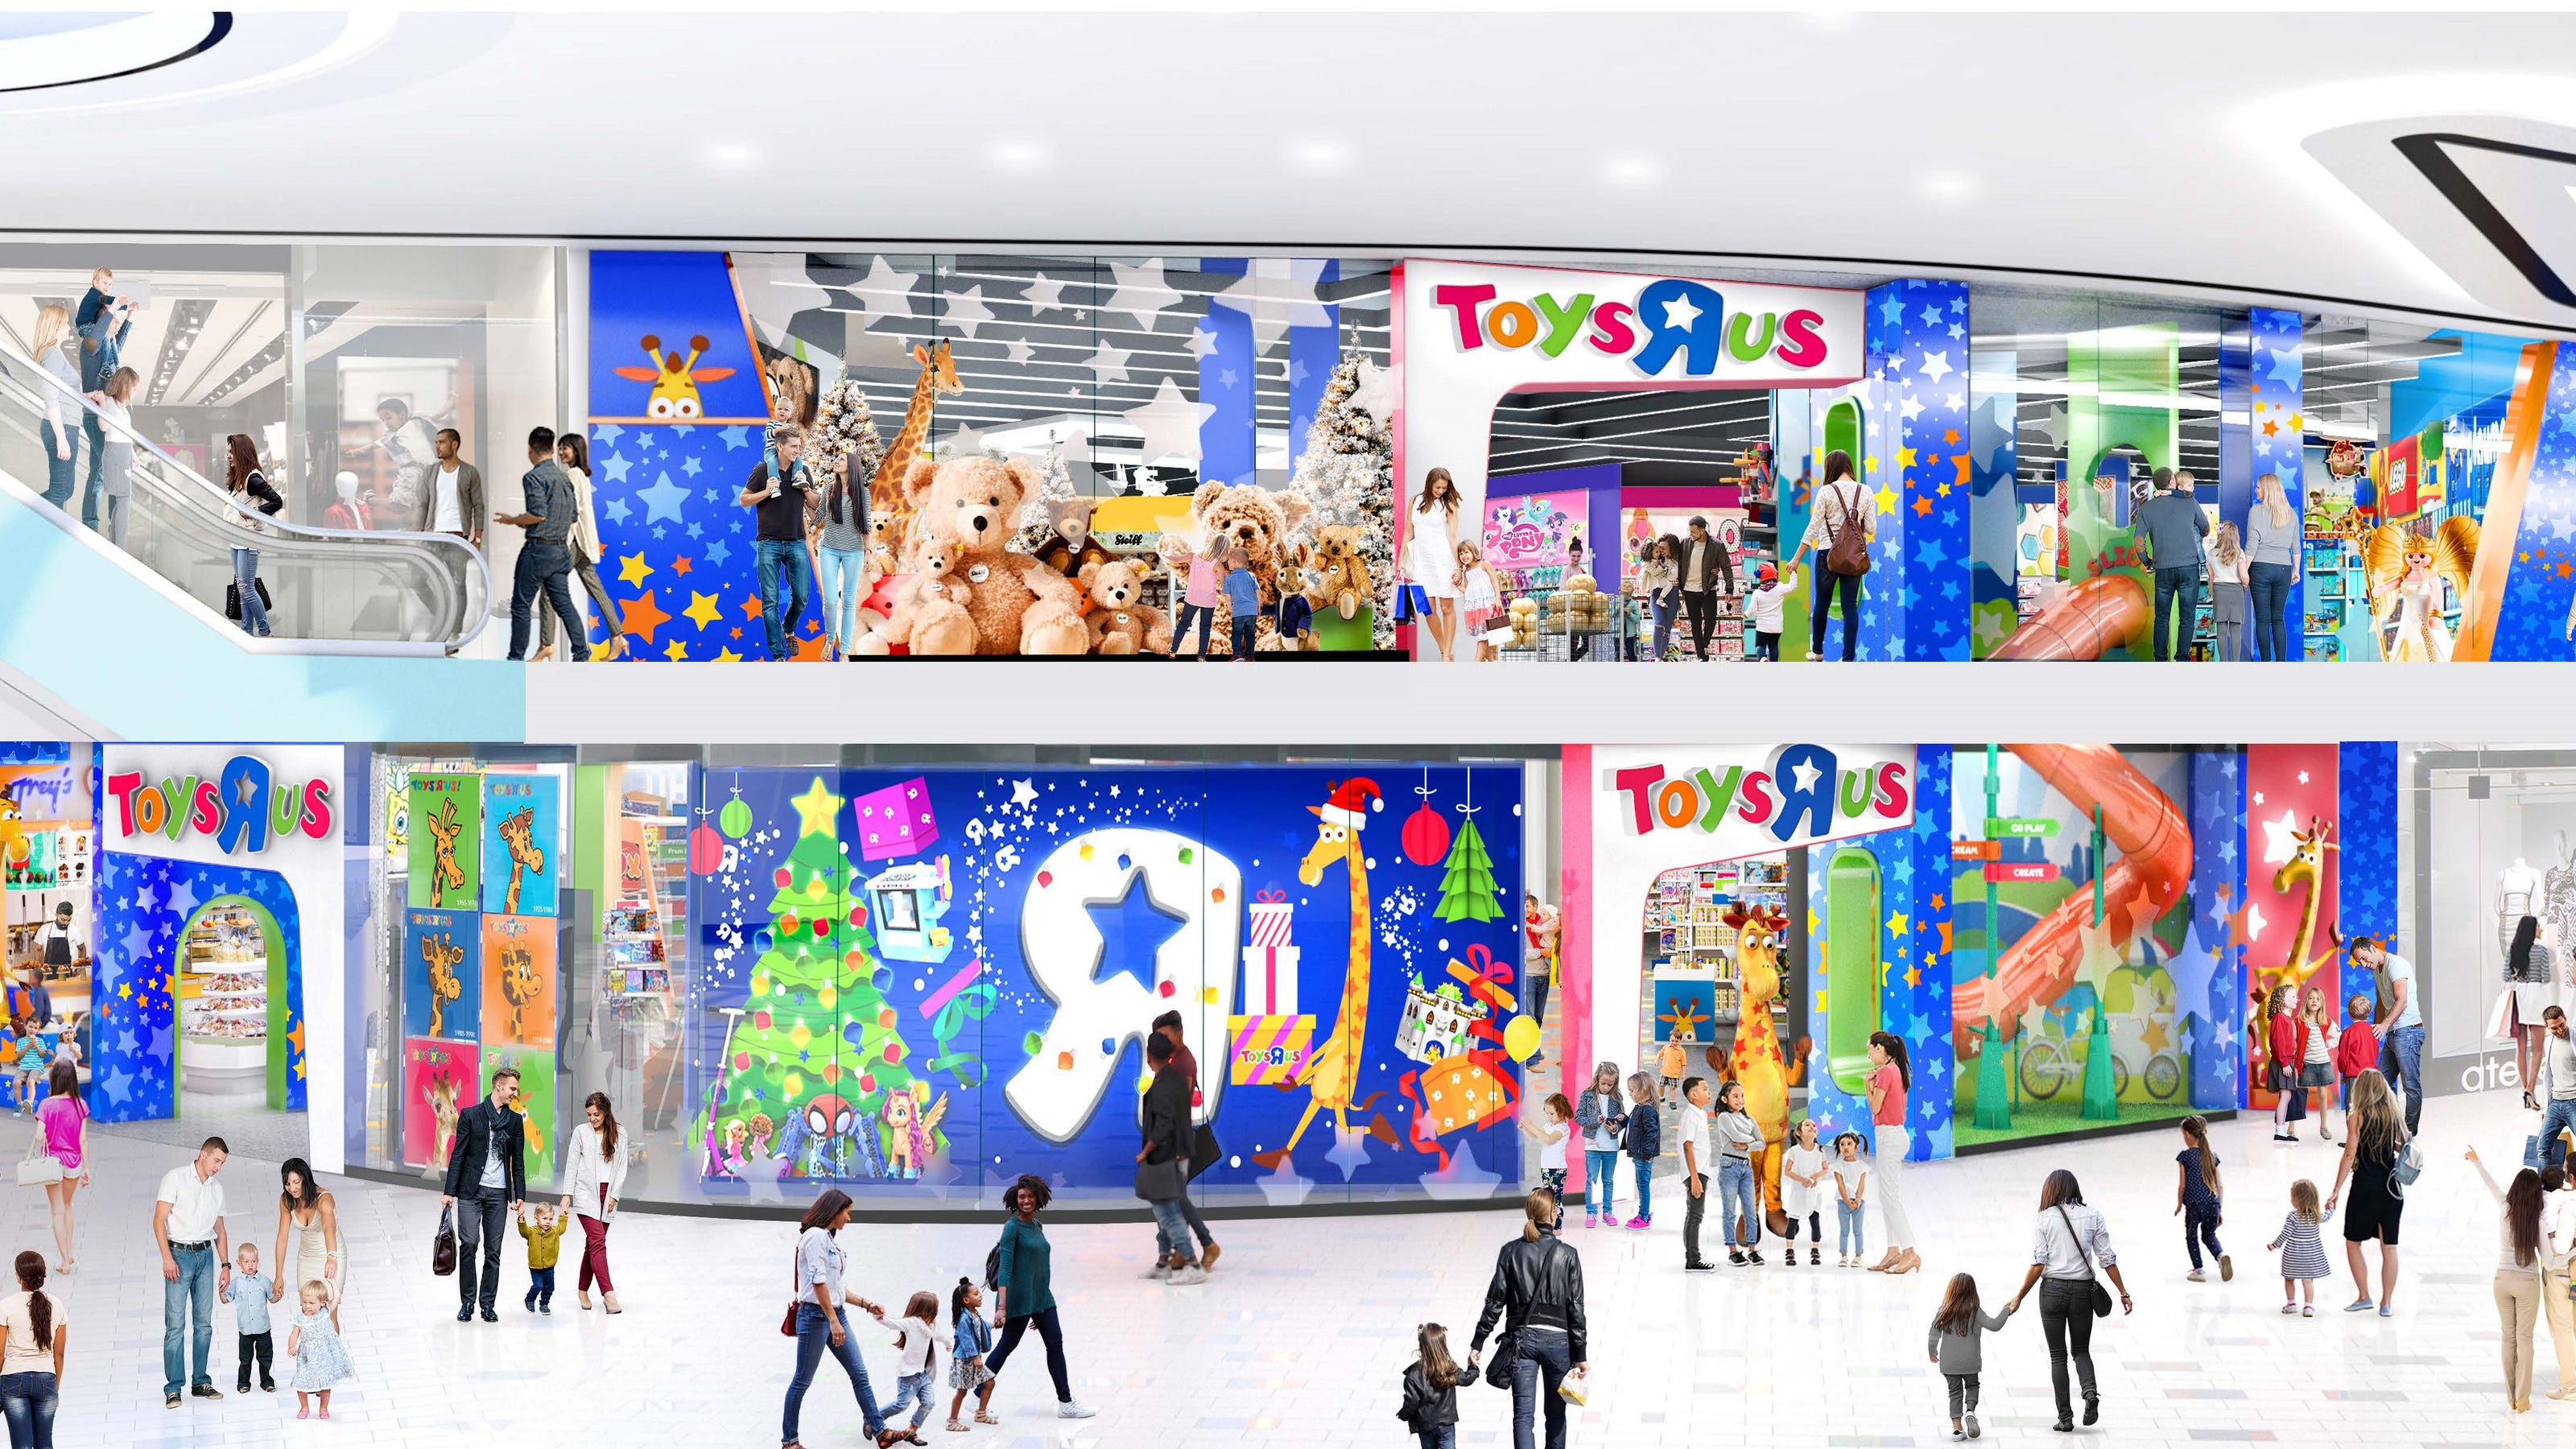 Toys R Us is opening a new store with a 2-story slide and an ice cream parlor - USA TODAY